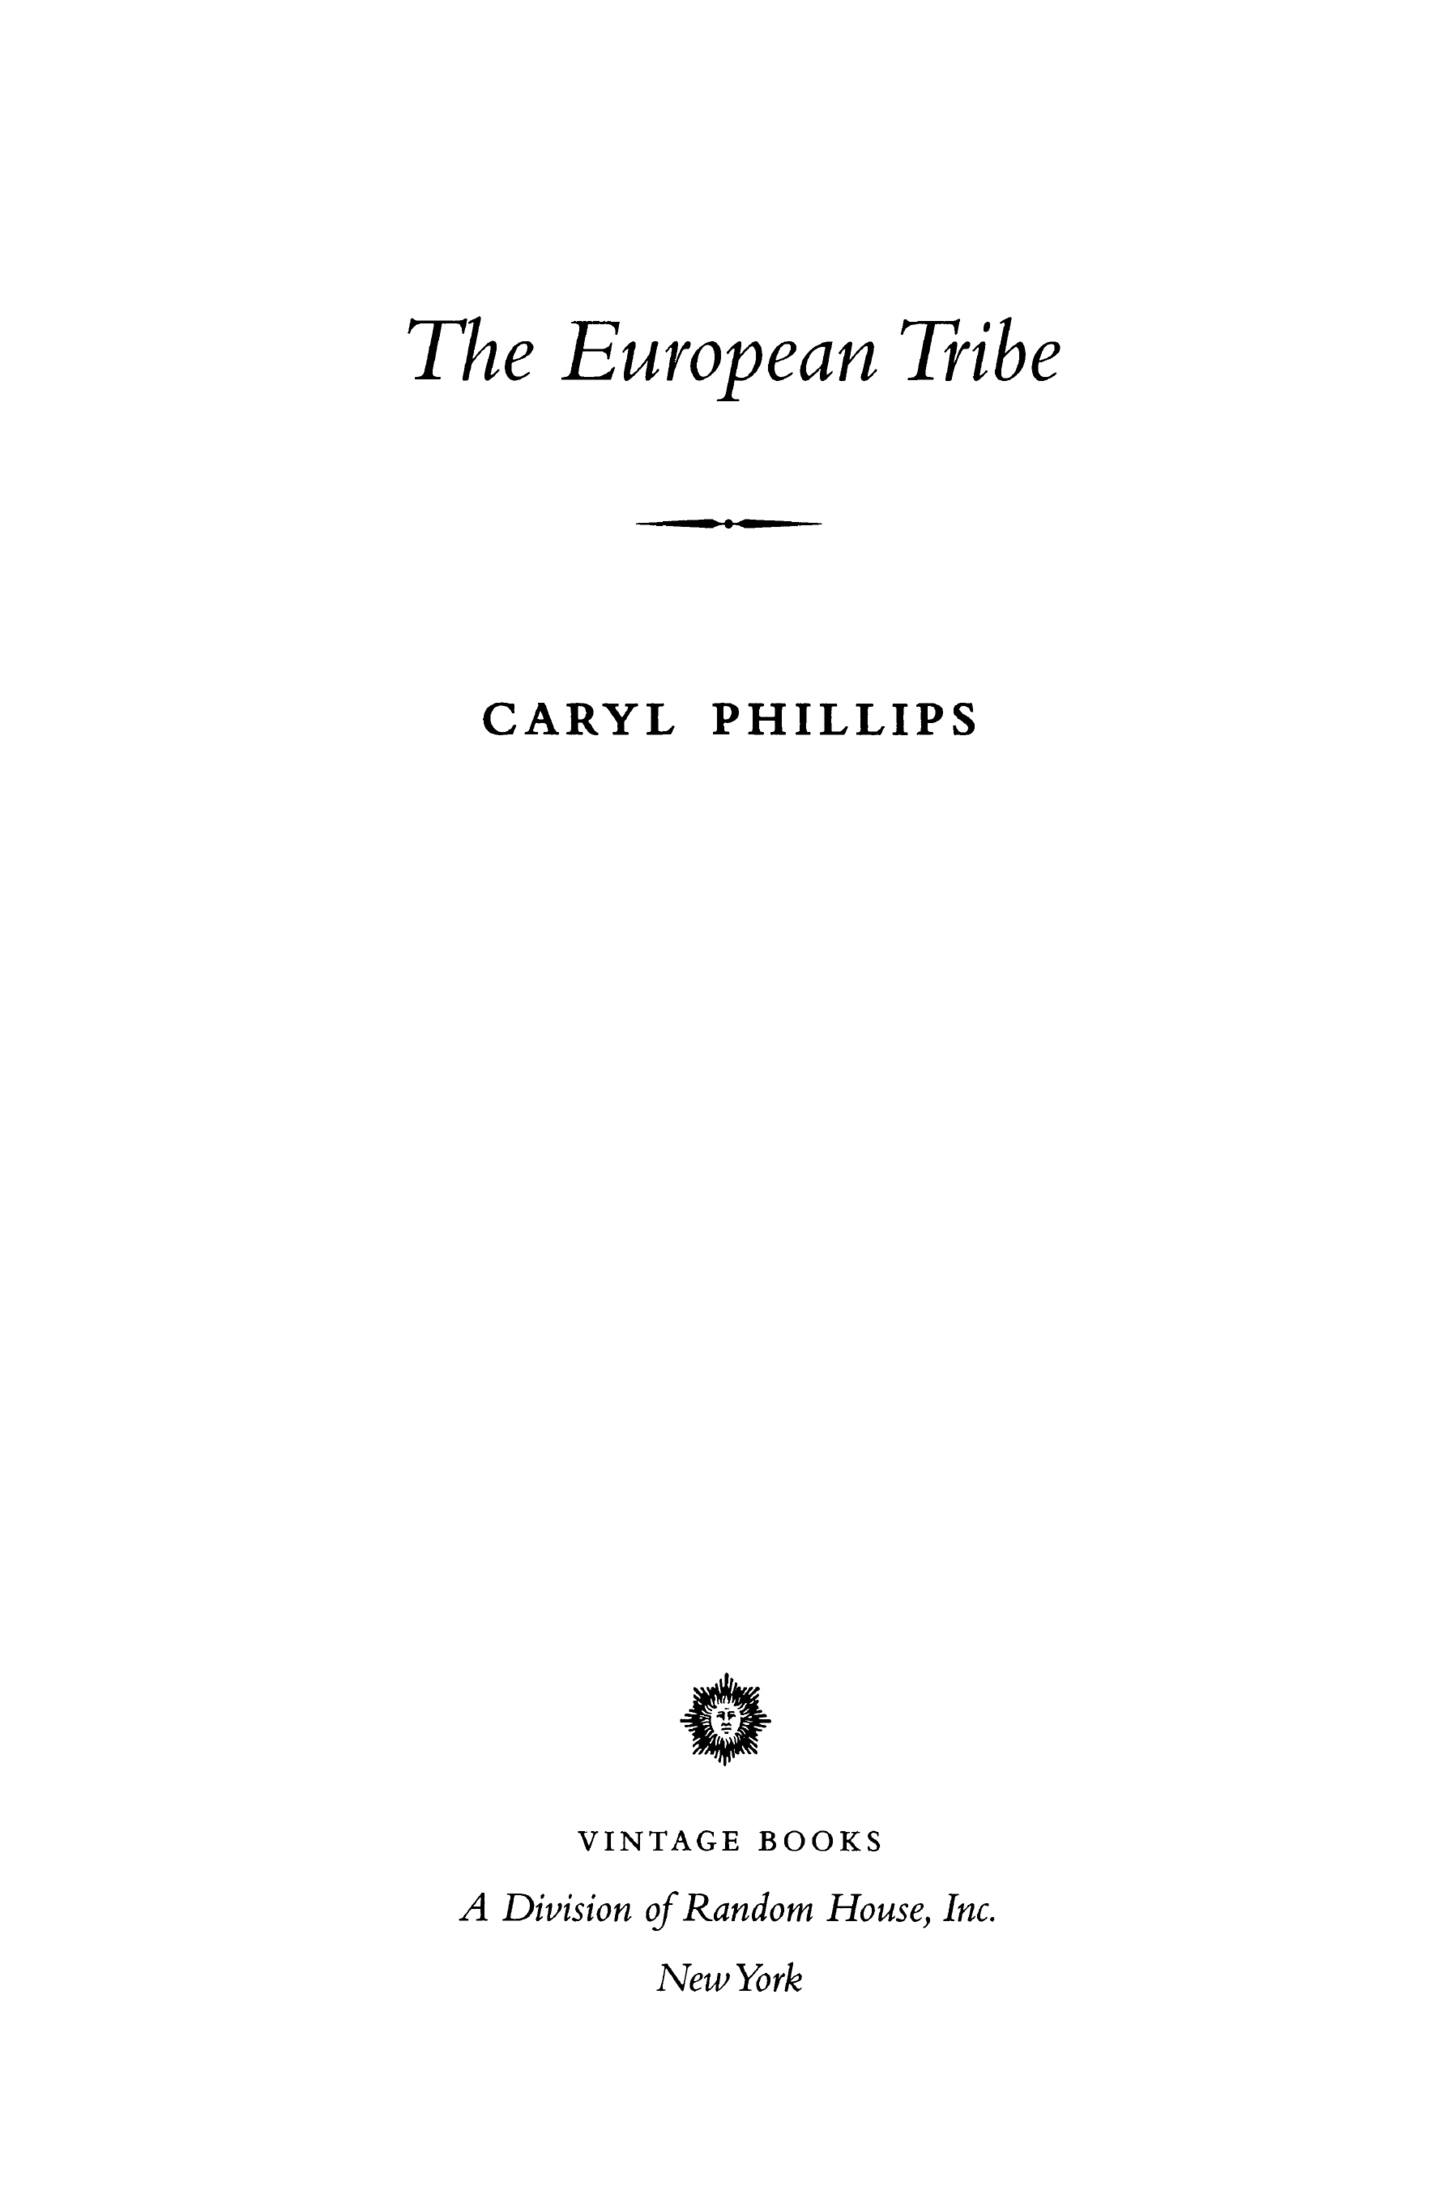 Copyright 1987 by Caryl Phillips Afterword copyright 2000 by Caryl Phillips - photo 2